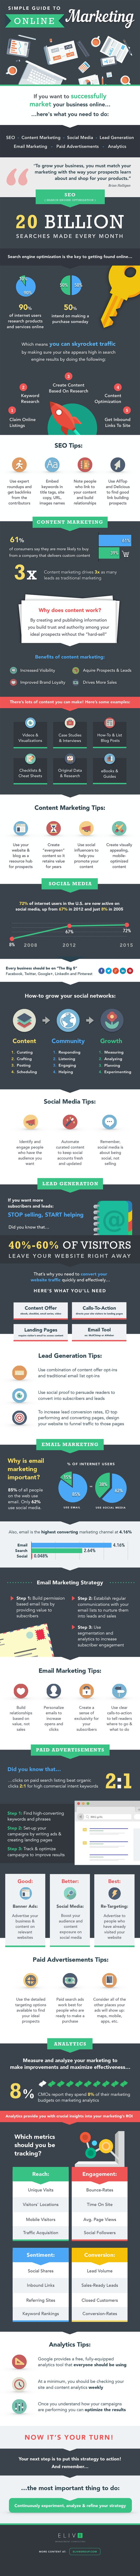 Infographic Of The Week: A Quick Guide To Online Marketing